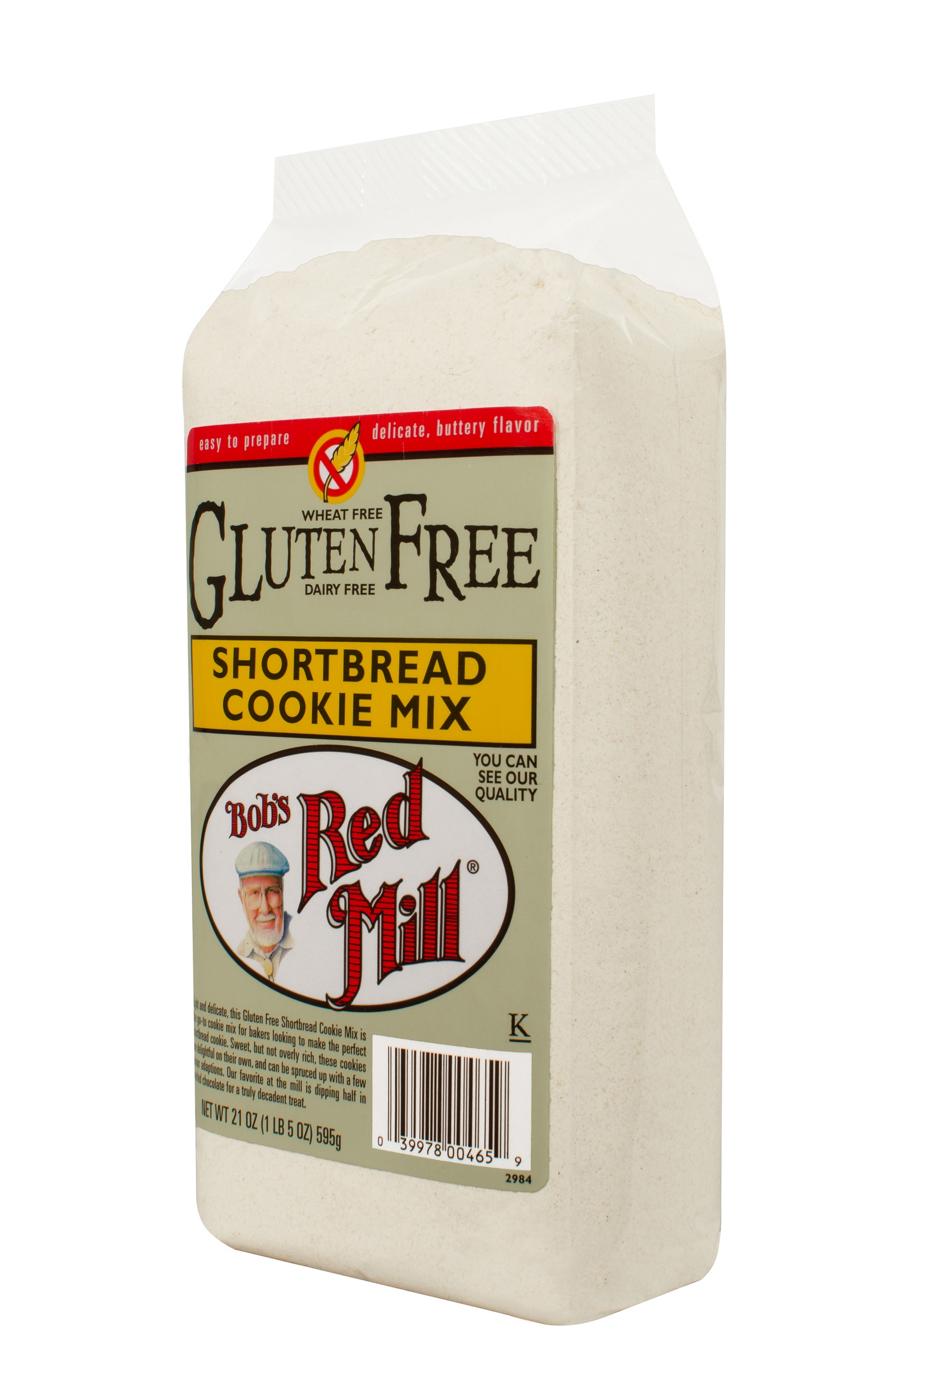 Bob's Red Mill Gluten Free Shortbread Cookie Mix; image 1 of 2